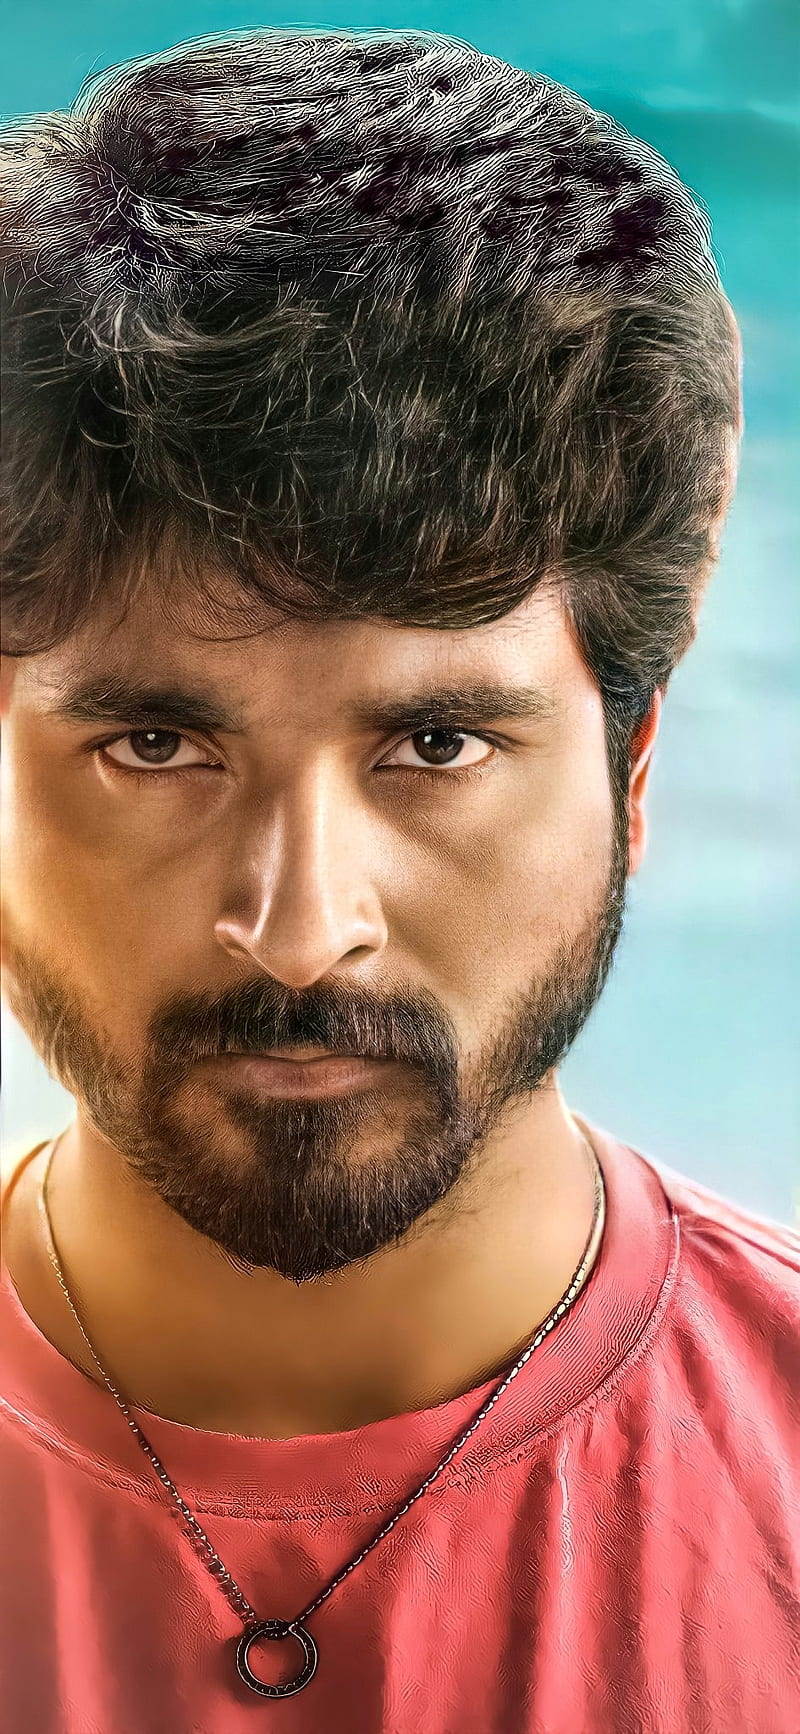 Stunning Compilation of Over 999+ High-Definition Sivakarthikeyan Images in 4K